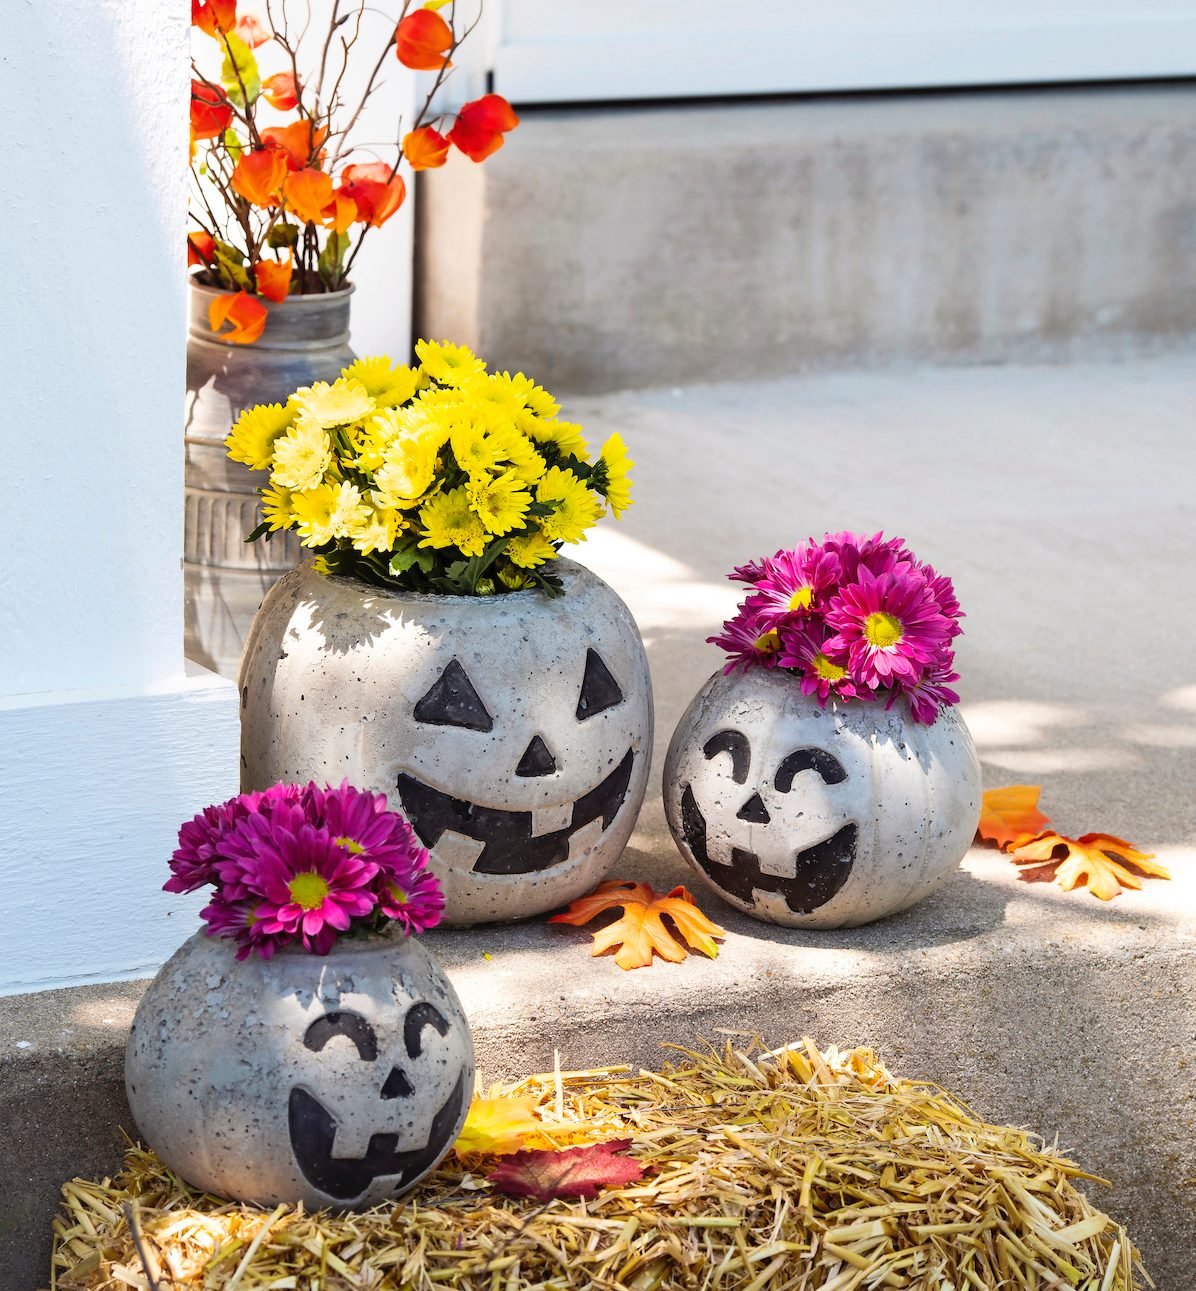 Fall Decorating: Fill a Pumpkin With Flowers - Birds and Blooms